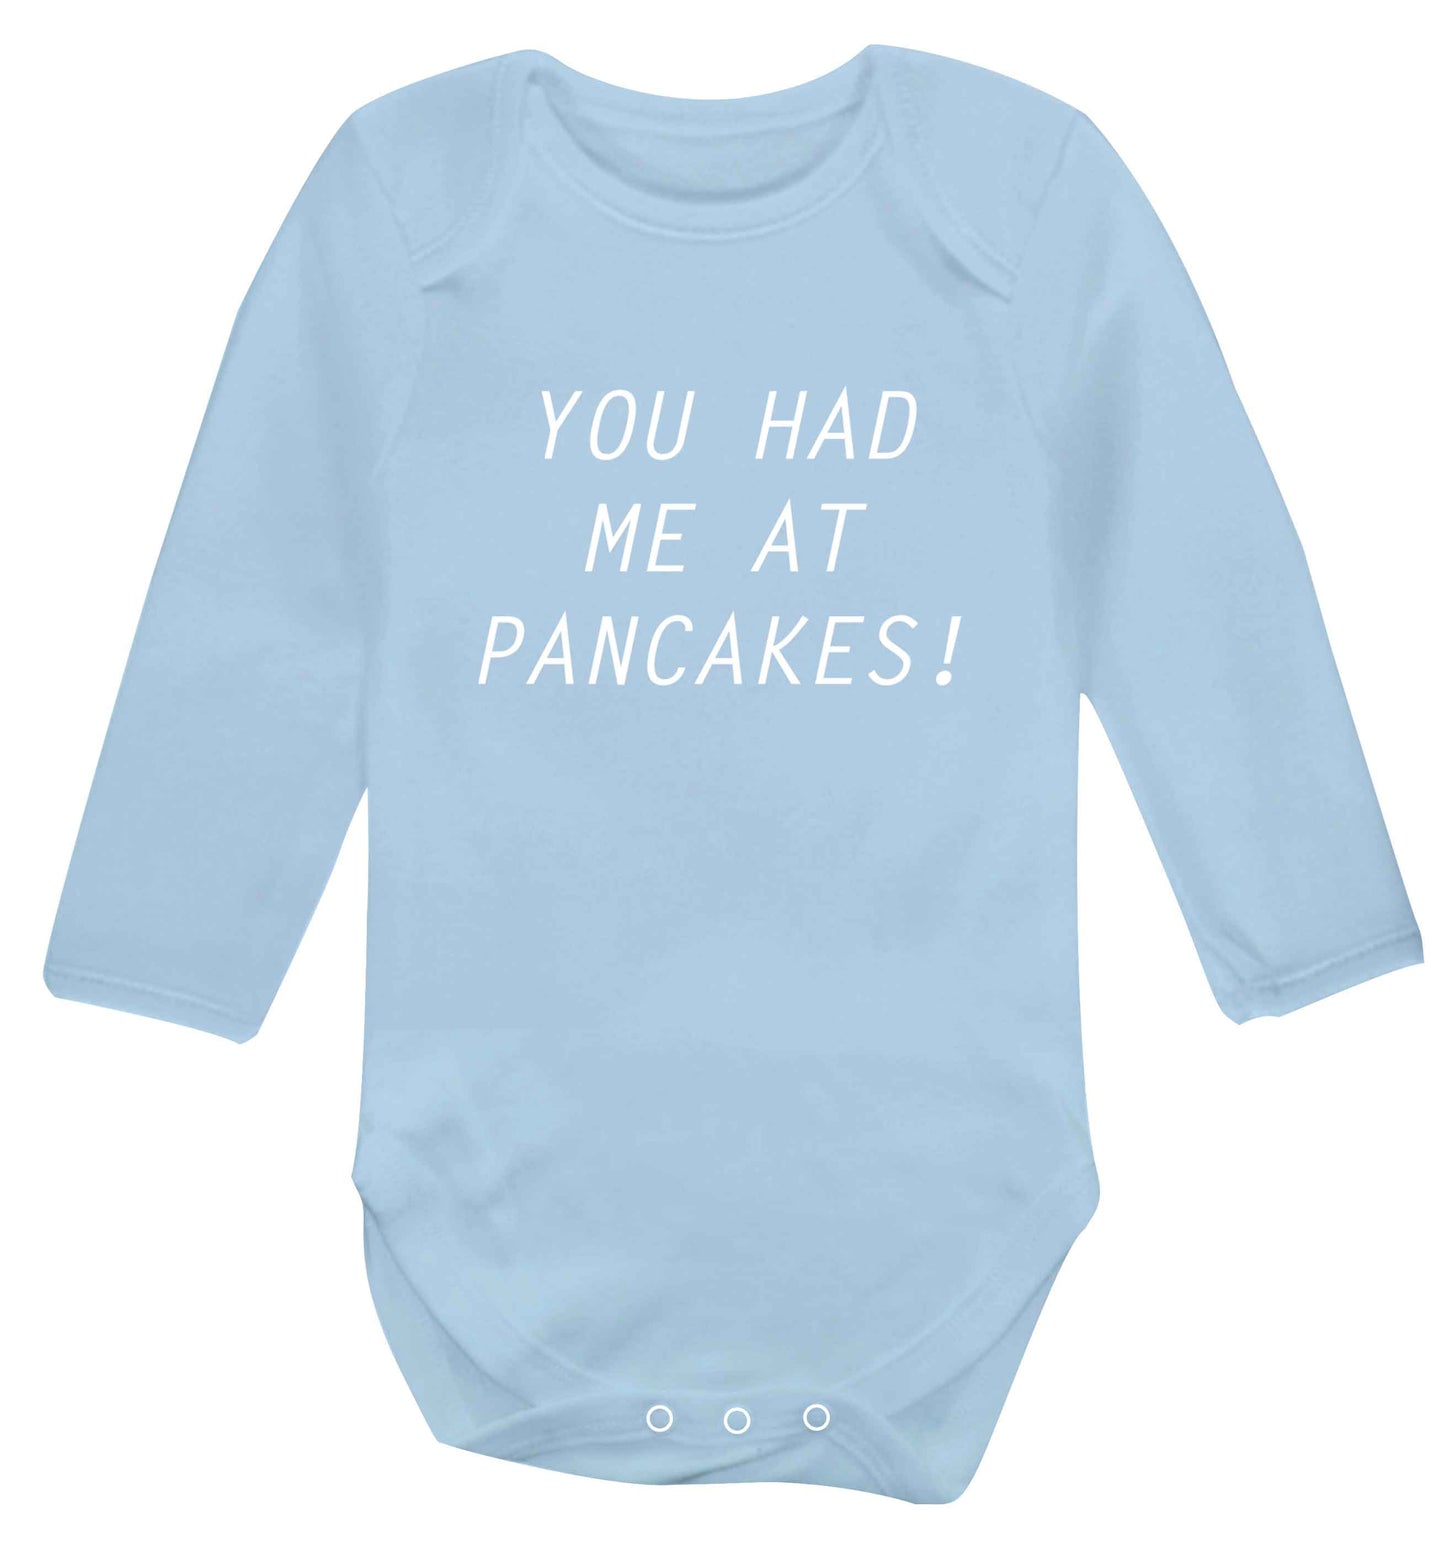 You had me at pancakes baby vest long sleeved pale blue 6-12 months